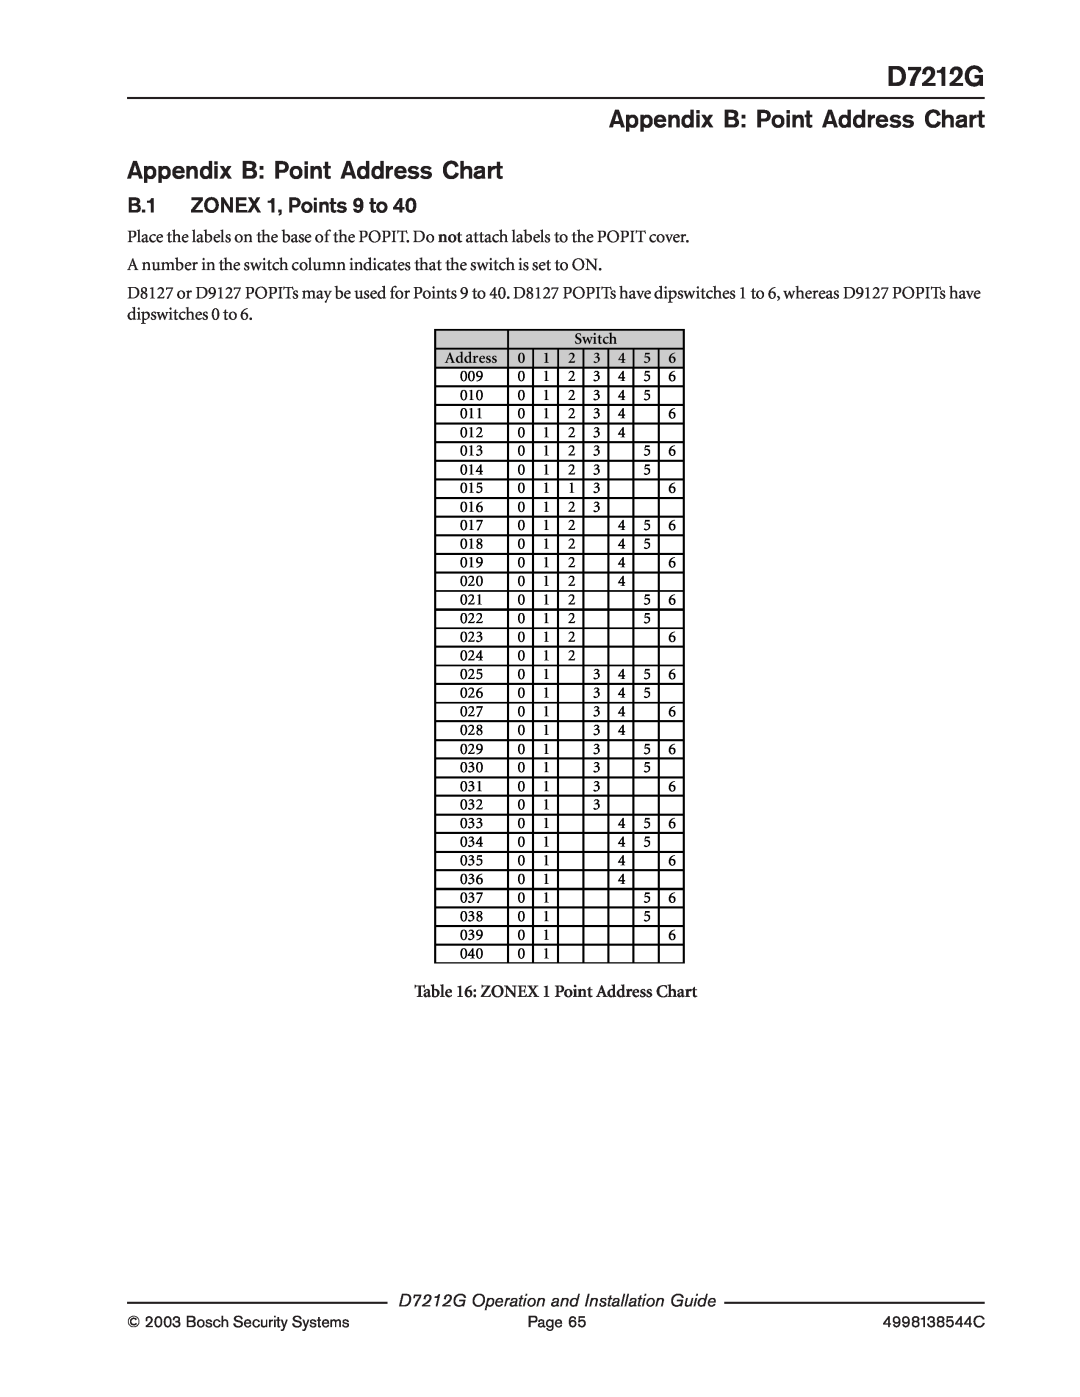 Bosch Appliances Appendix B Point Address Chart, B.1 ZONEX 1, Points 9 to, D7212G Operation and Installation Guide 